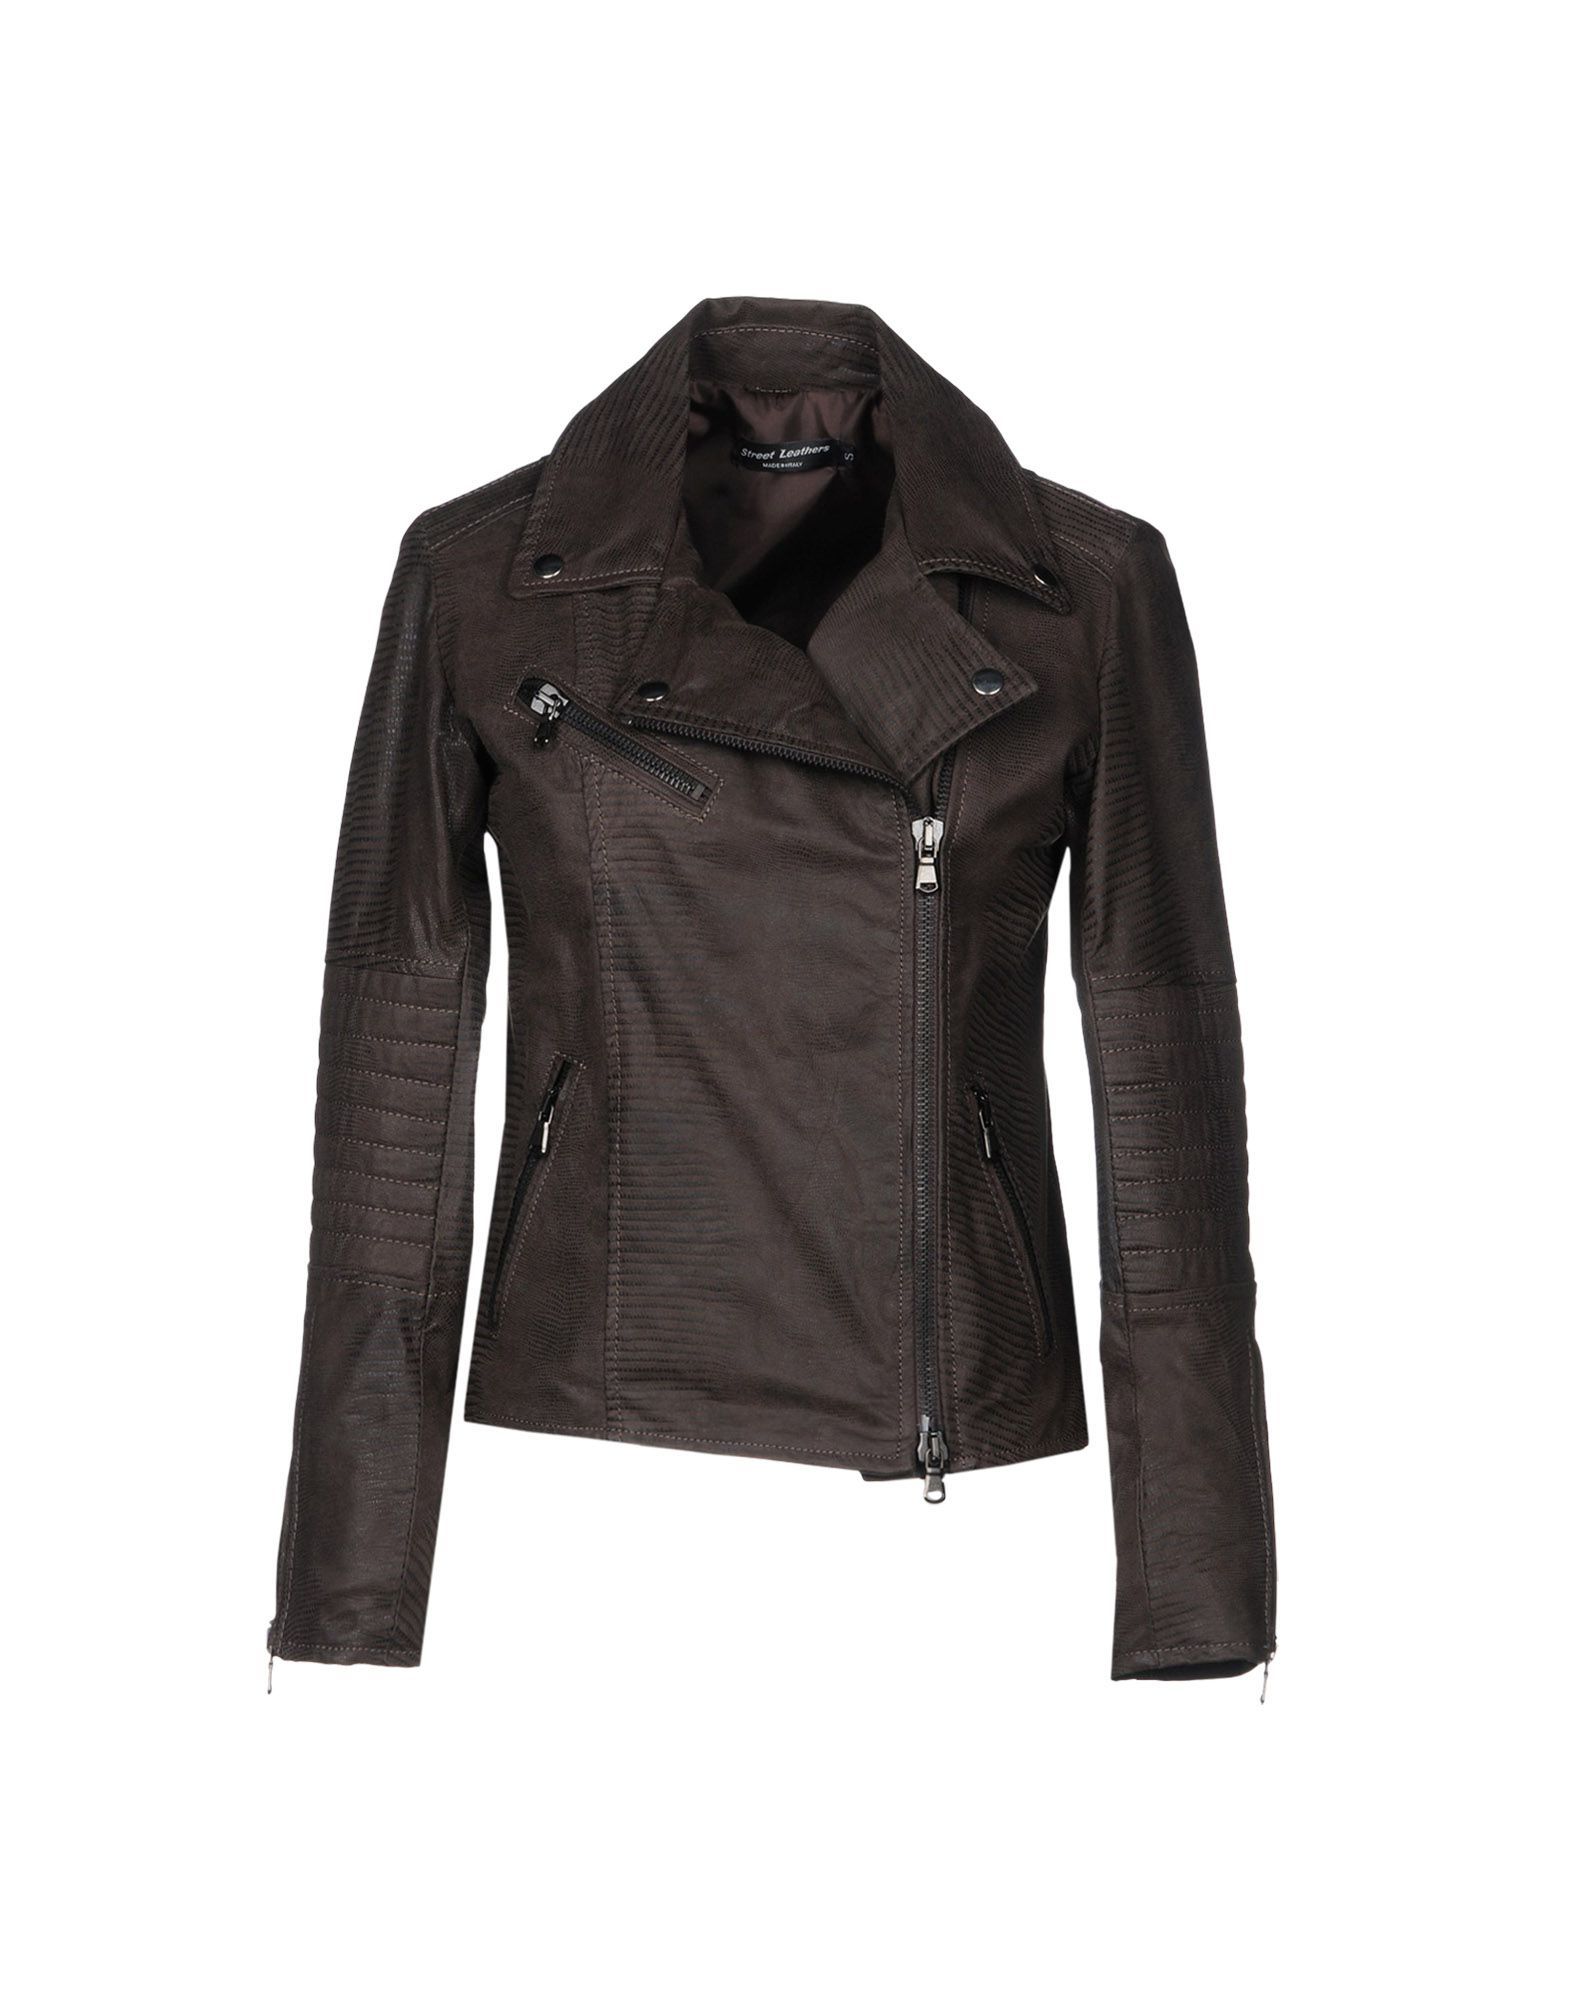 Leather<br>No appliqu�s<br>Solid colour<br>Double-breasted<br>Zip<br>Classic Neckline<br>Multipockets<br>Long sleeves<br>Fully lined<br>Printed leather<br>Contains non-textile parts of animal origin<br>Biker style<br>Small sized<br>